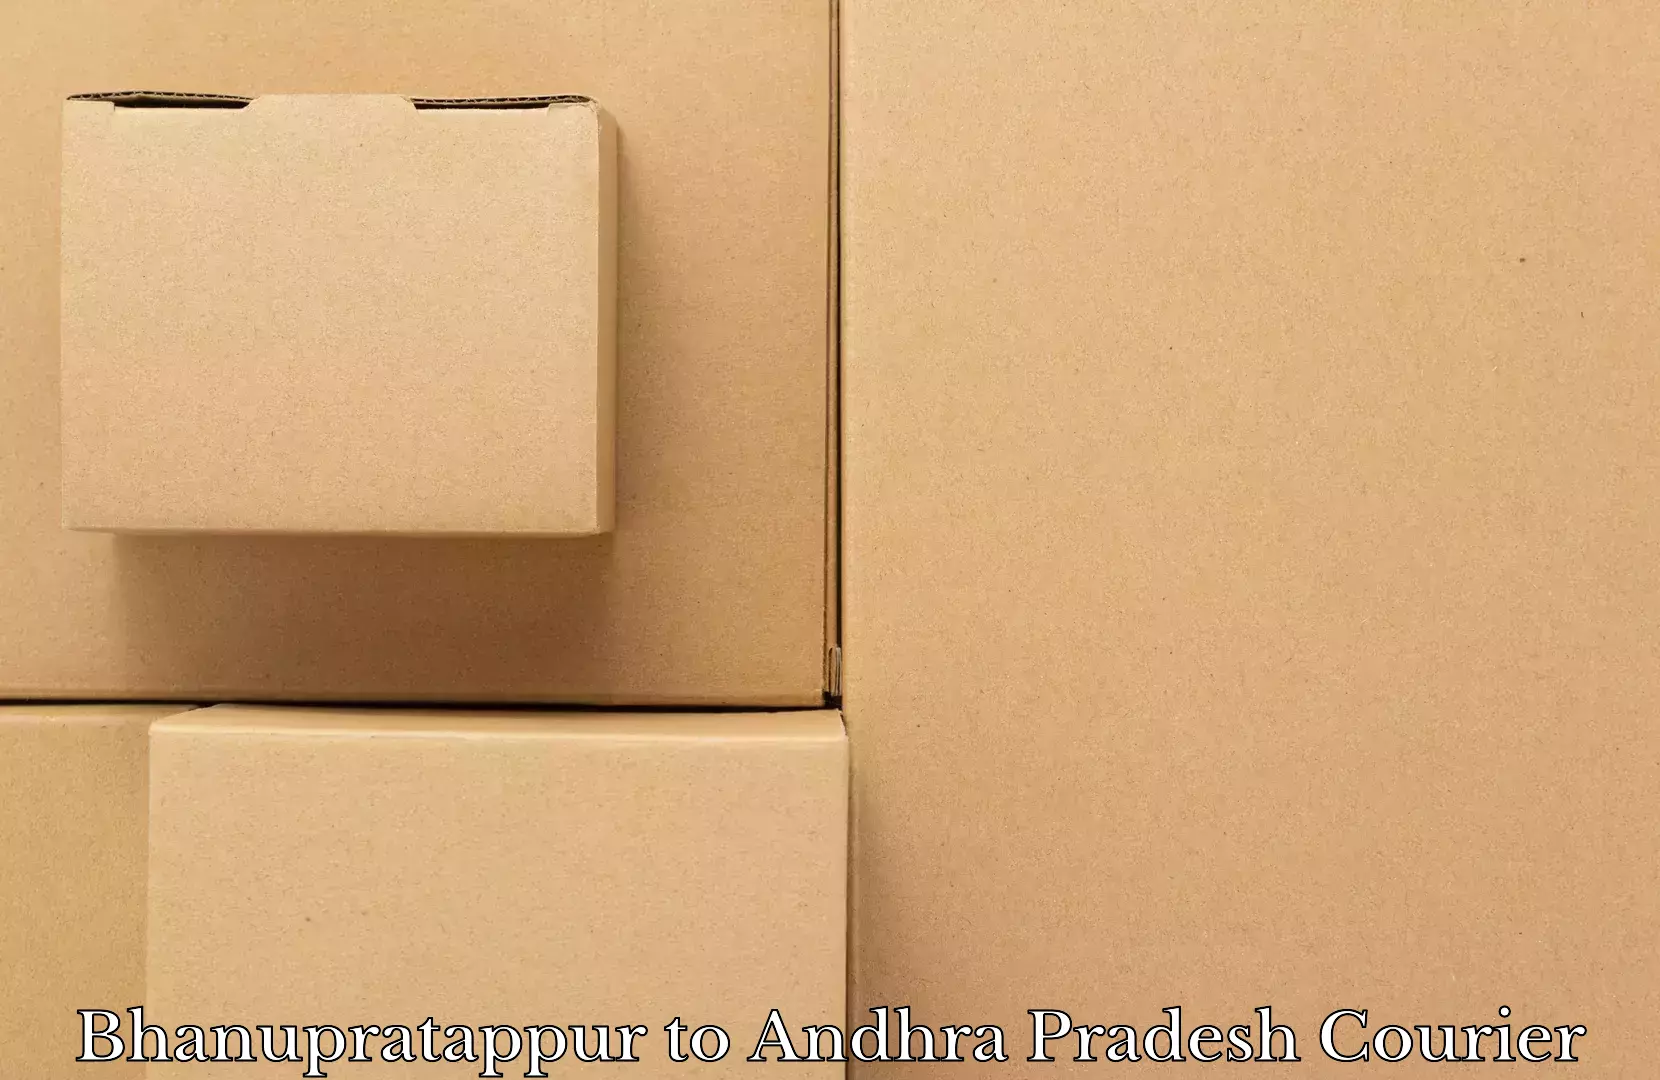 Personal effects shipping in Bhanupratappur to Sri City